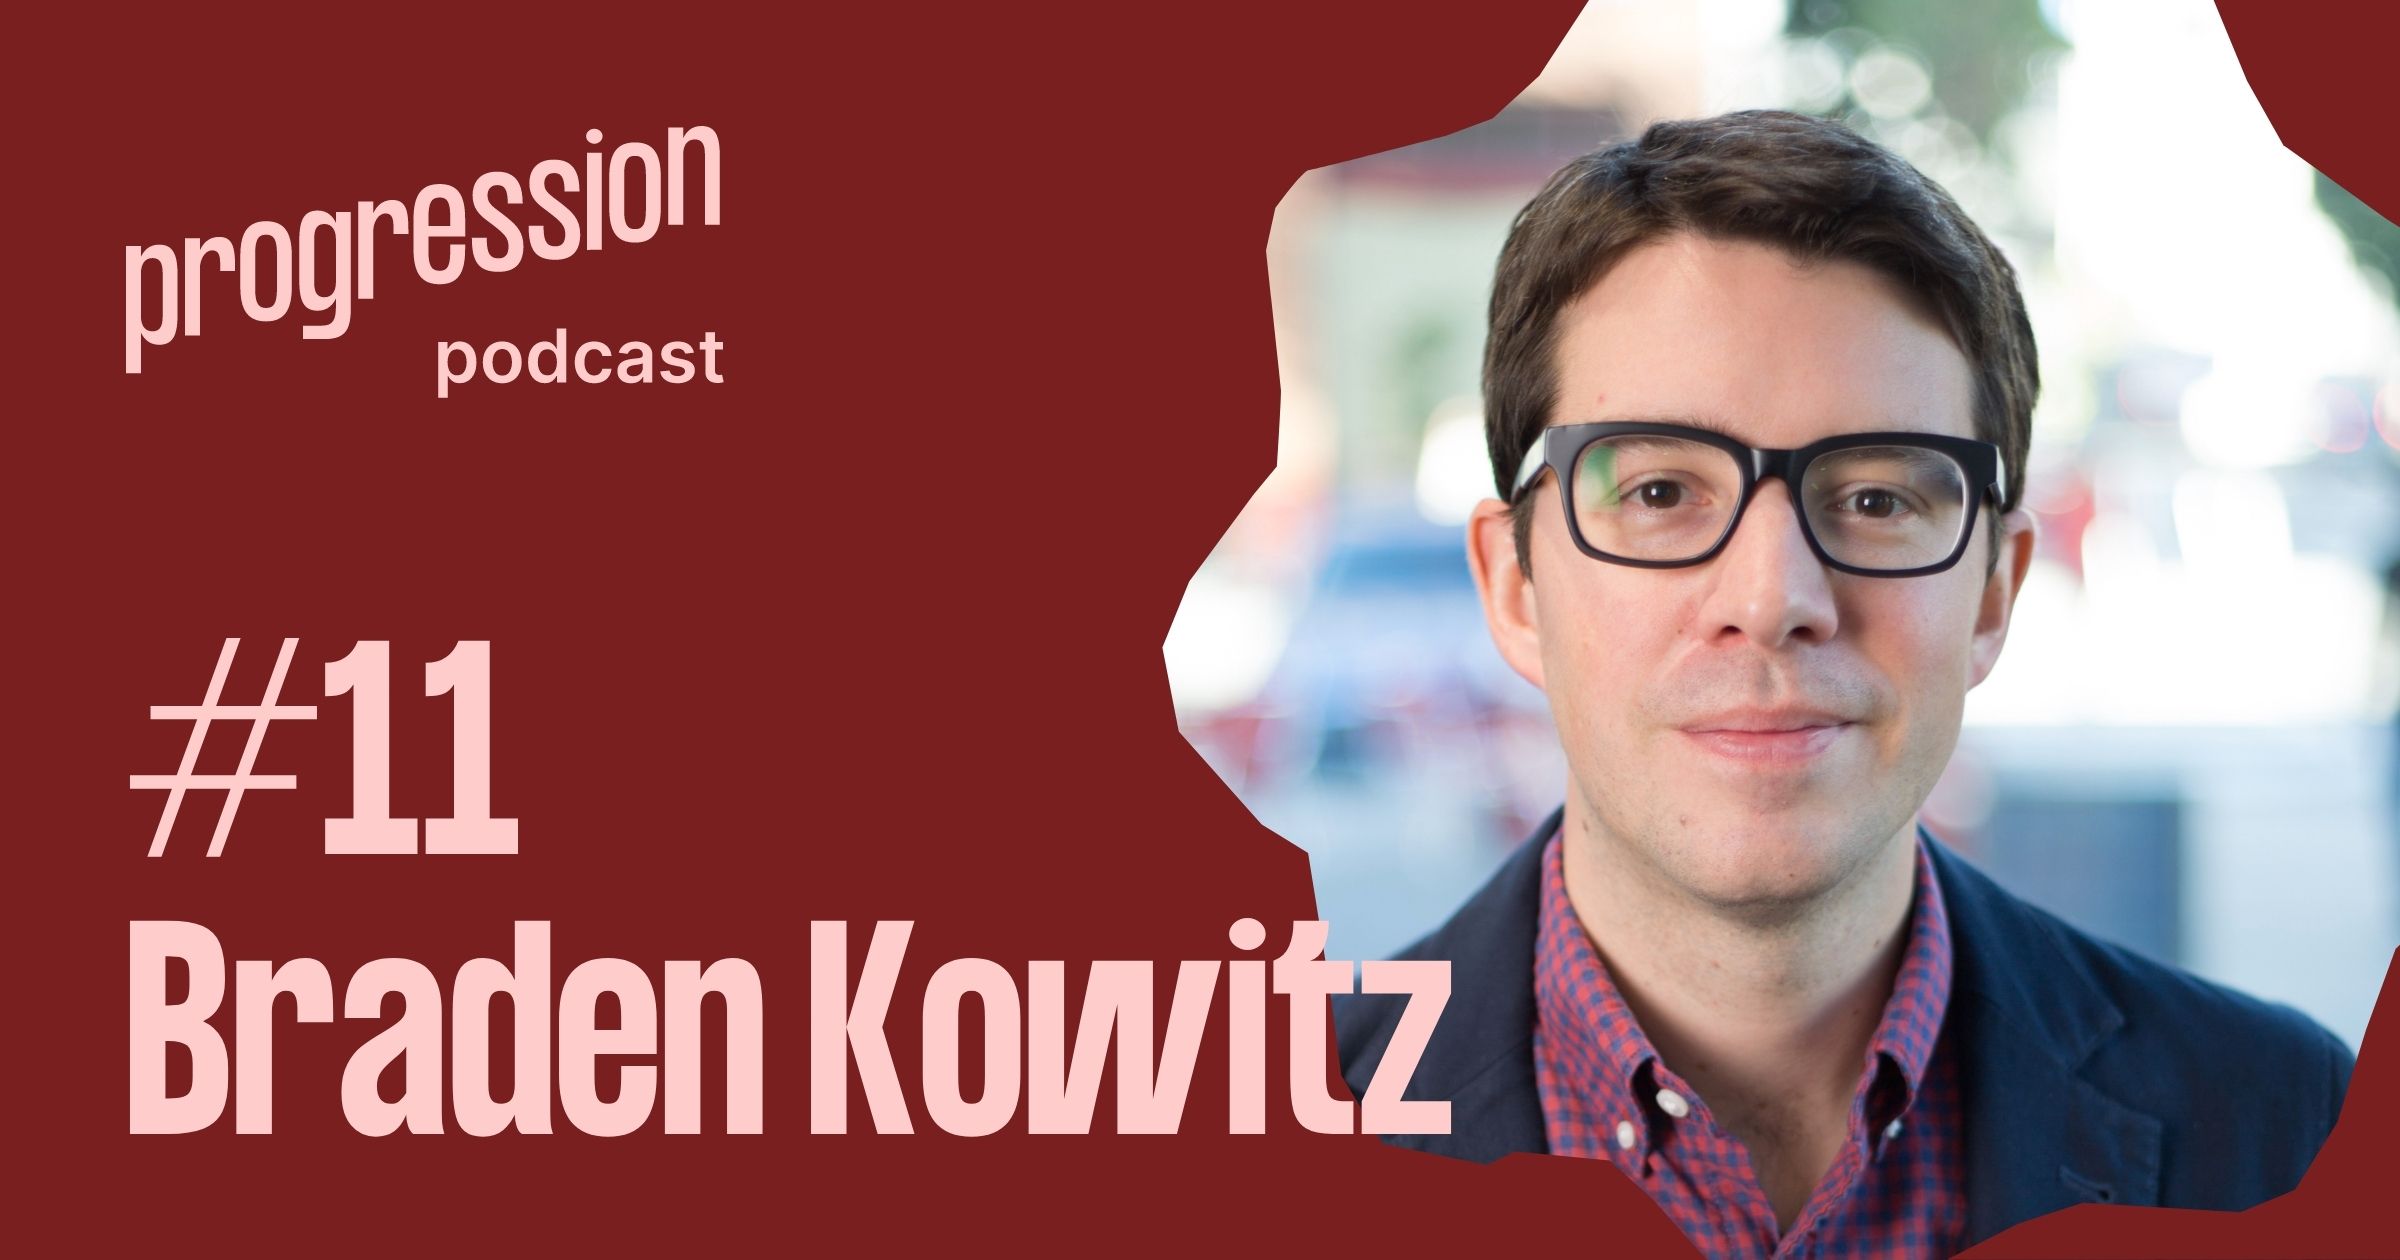 Podcast #11: Braden Kowitz (Google Ventures, Range) on co-creating the Design Sprint, becoming a founder and his design journey